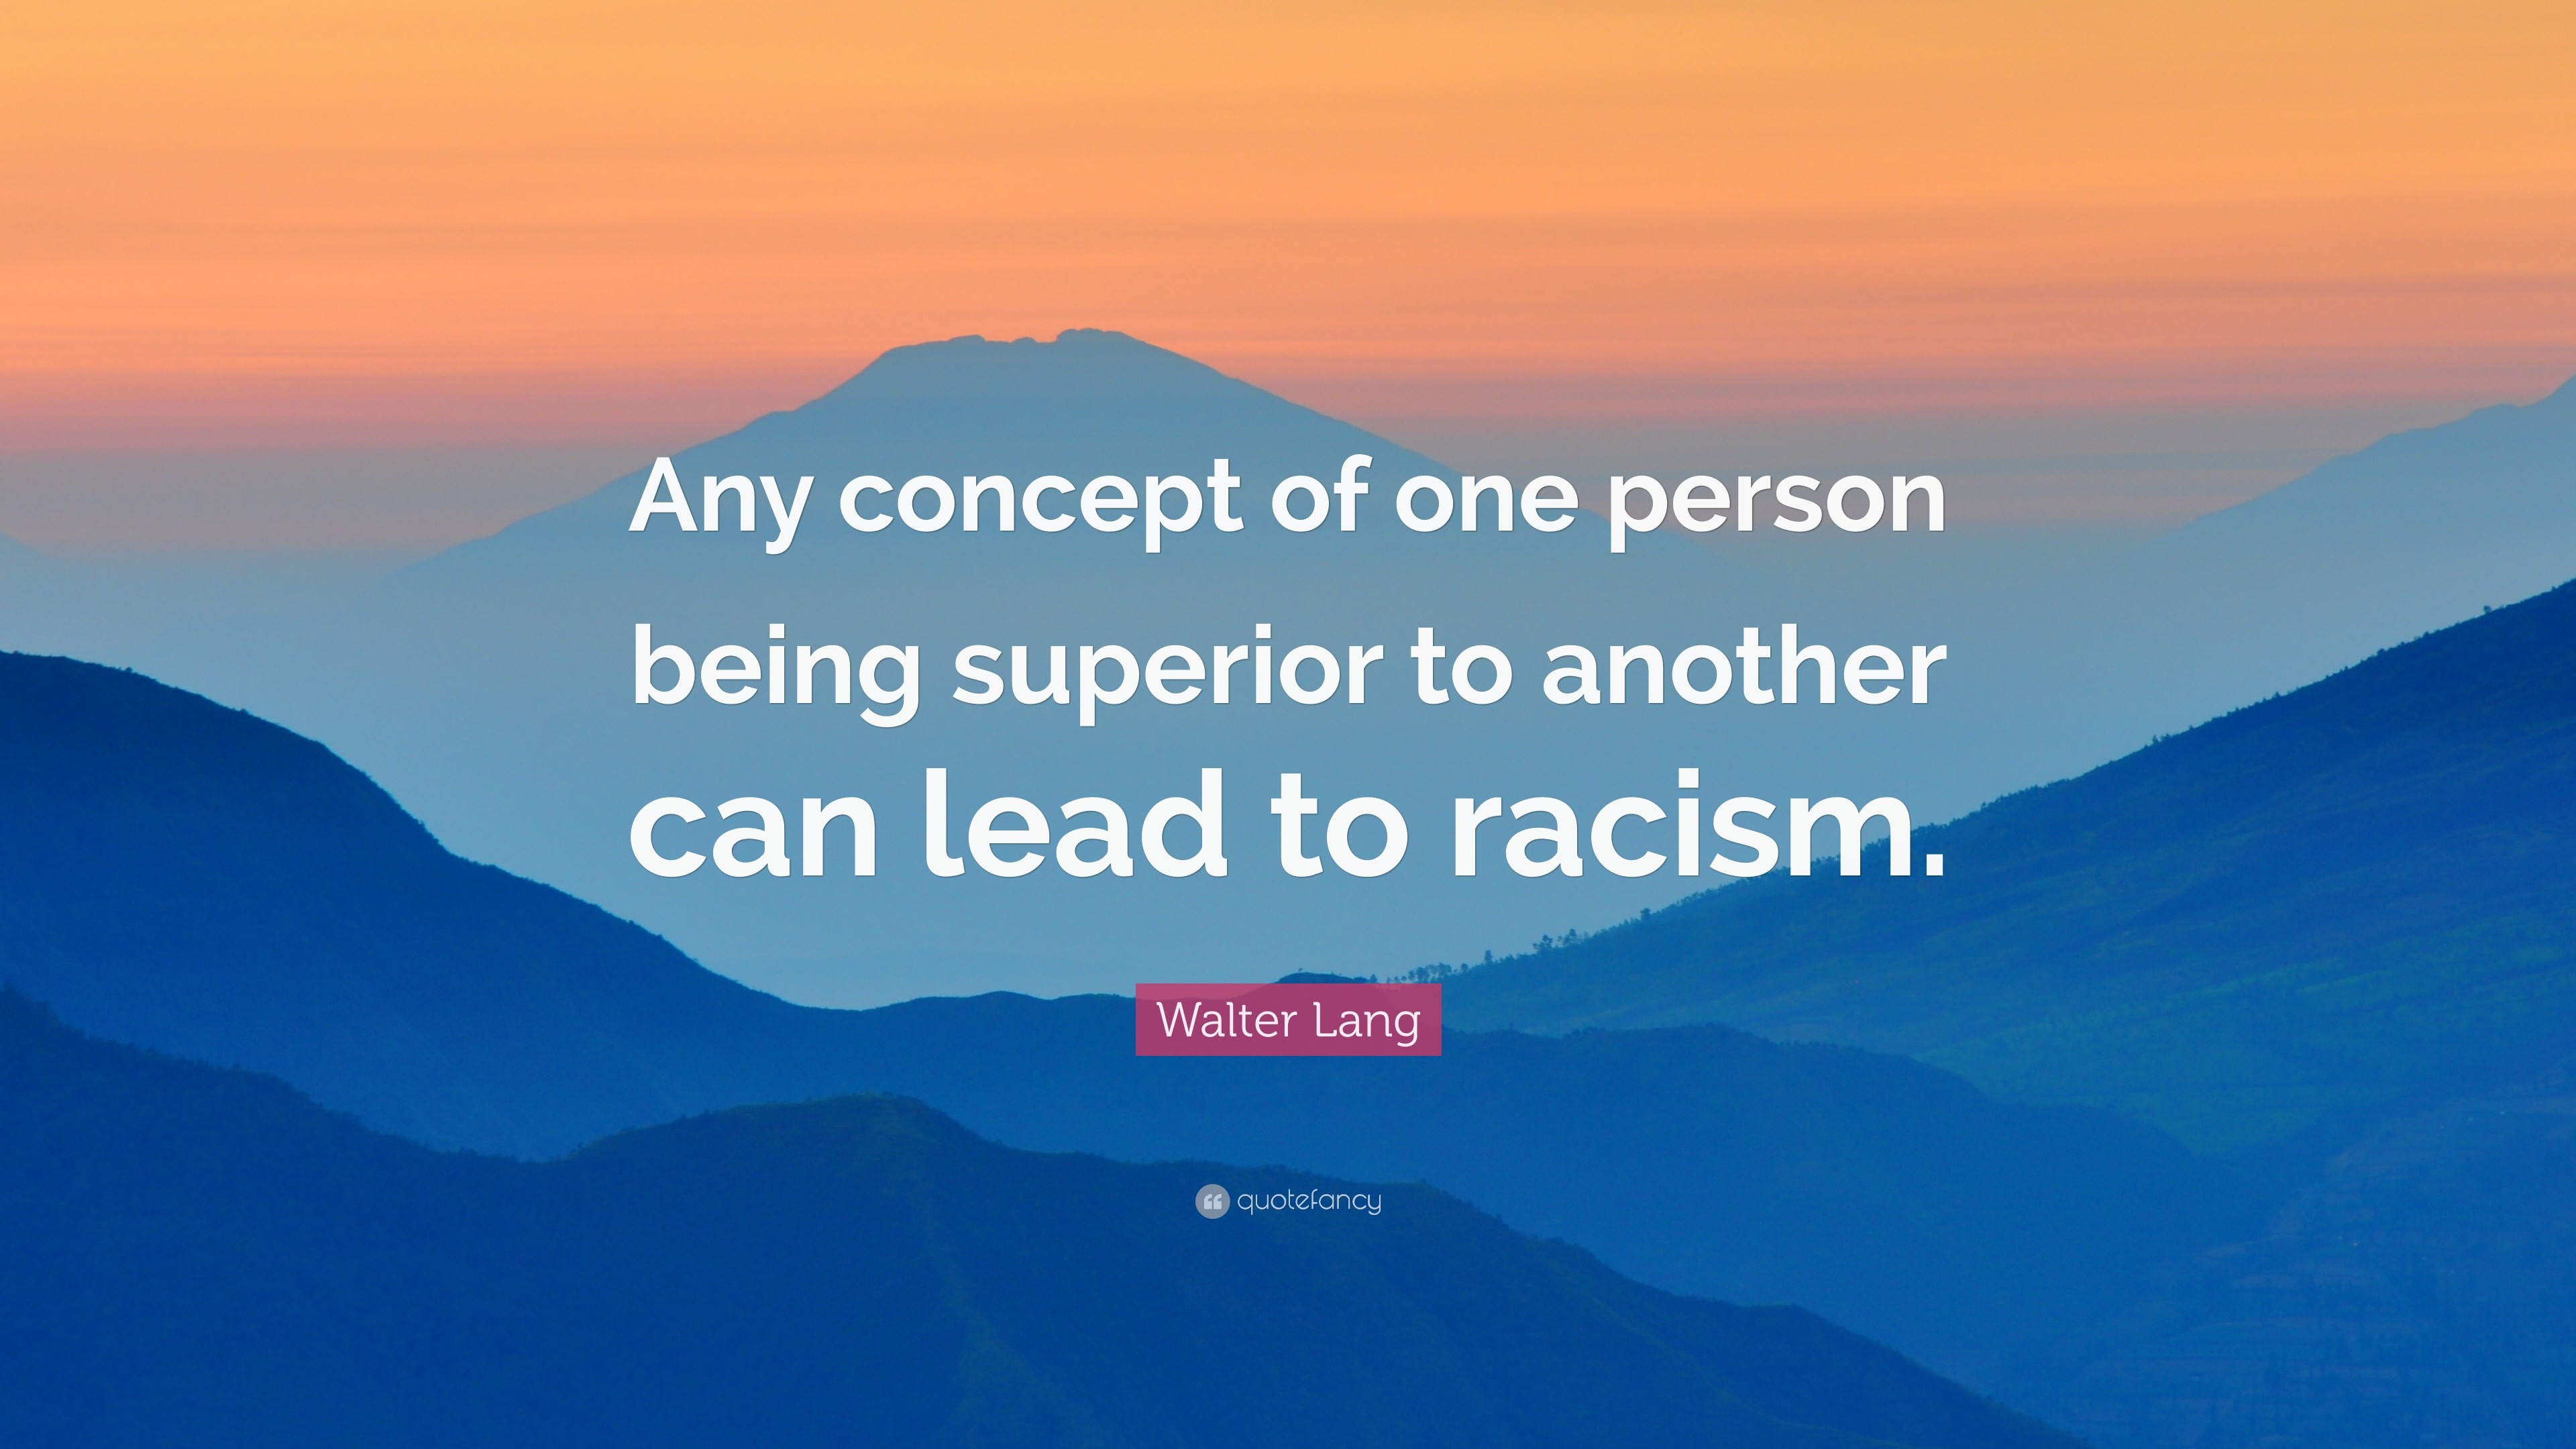 Walter Lang Quote: “Any concept of one person being superior to another ...